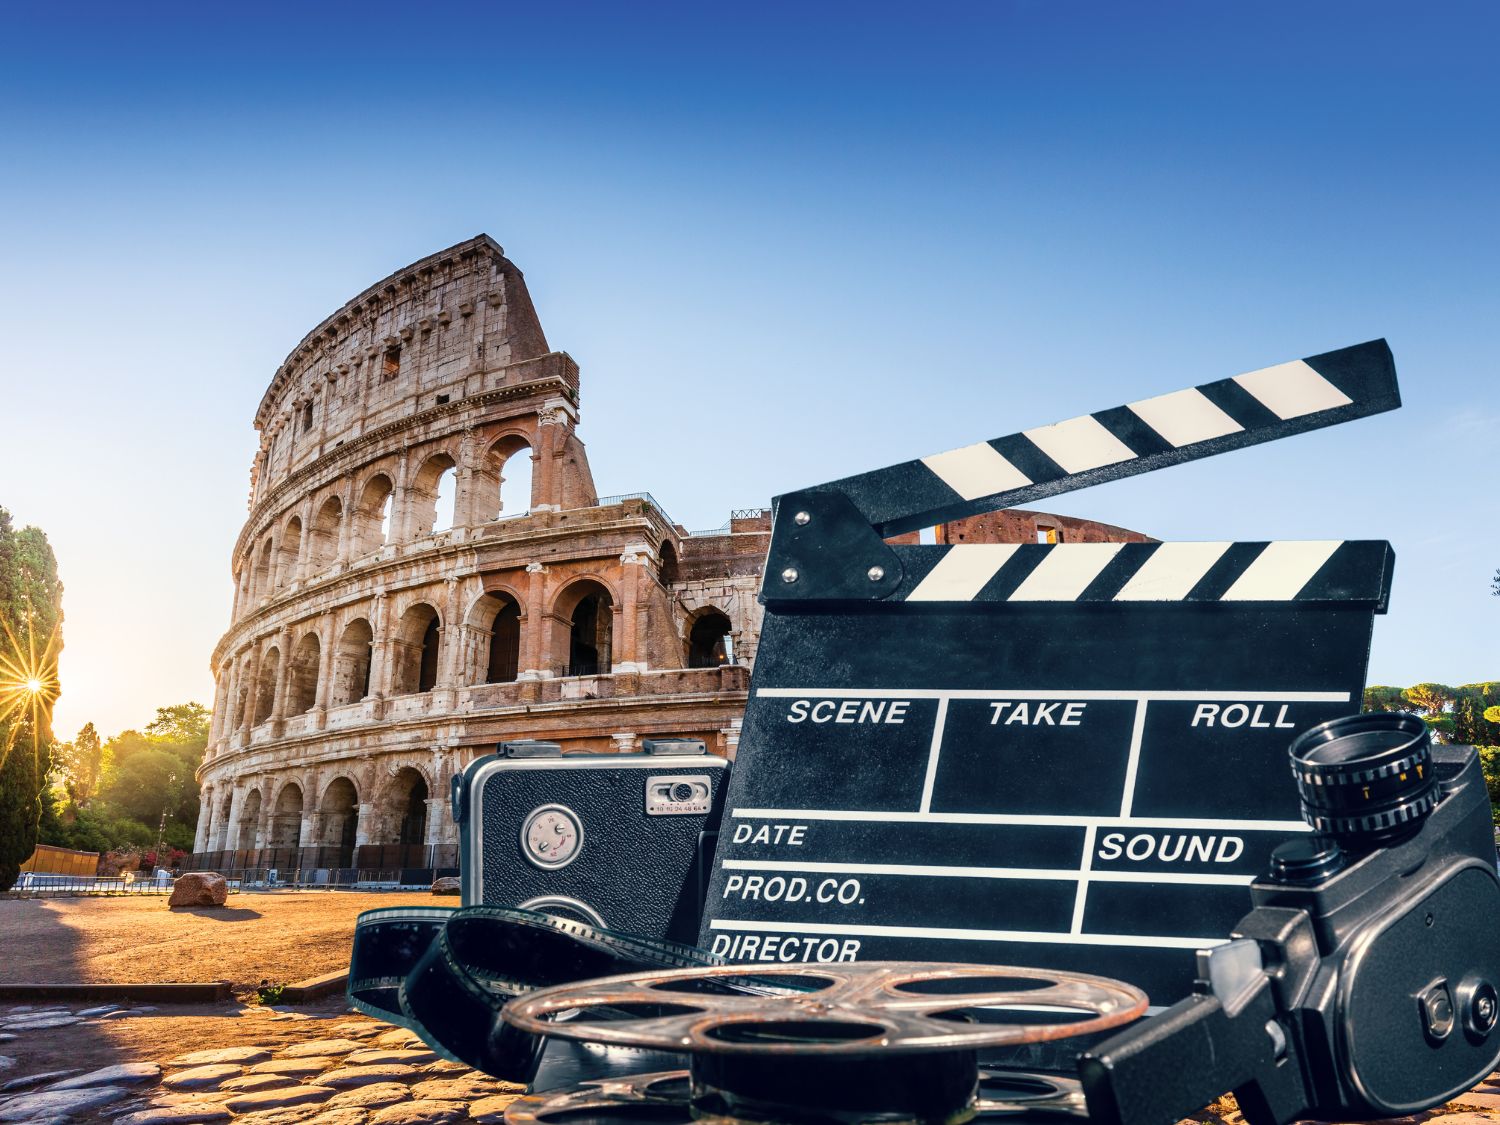 13 Extraordinary Movies Set In Rome That Will Inspire You To Visit!